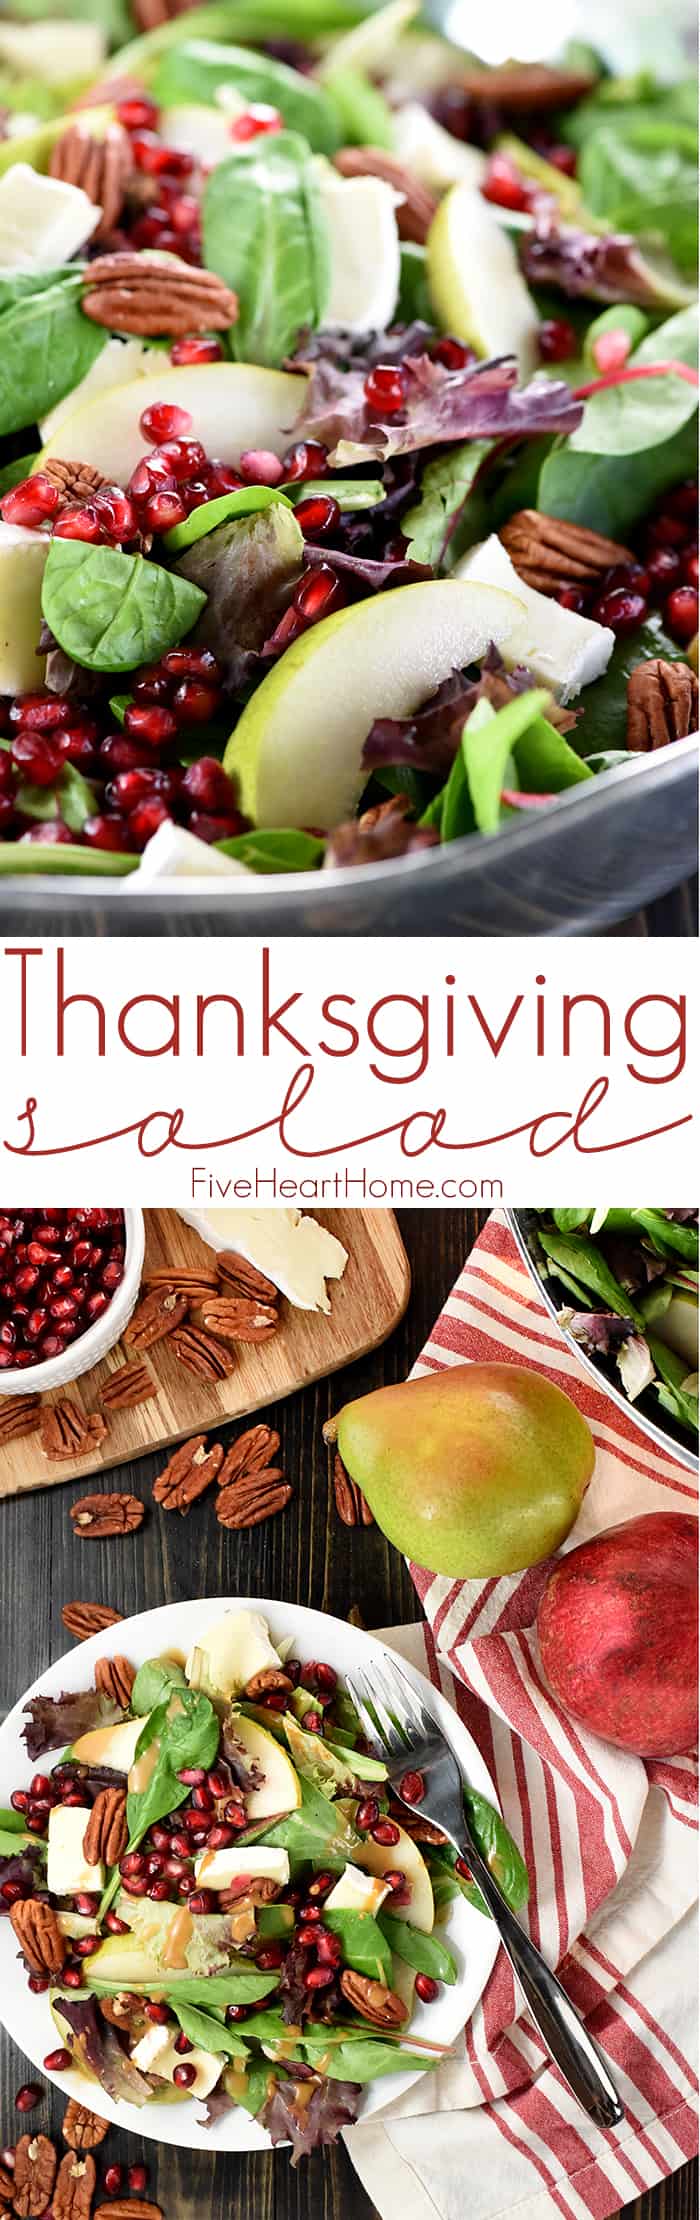 Thanksgiving Salad ~ this gorgeous Pomegranate, Pear, Pecan, & Brie Salad with Homemade Balsamic Vinaigrette is loaded with vibrant colors and flavors and contrasting textures. It would be the perfect addition to your Thanksgiving or Christmas holiday table, or it would make any dinner special! | FiveHeartHome.com via @fivehearthome